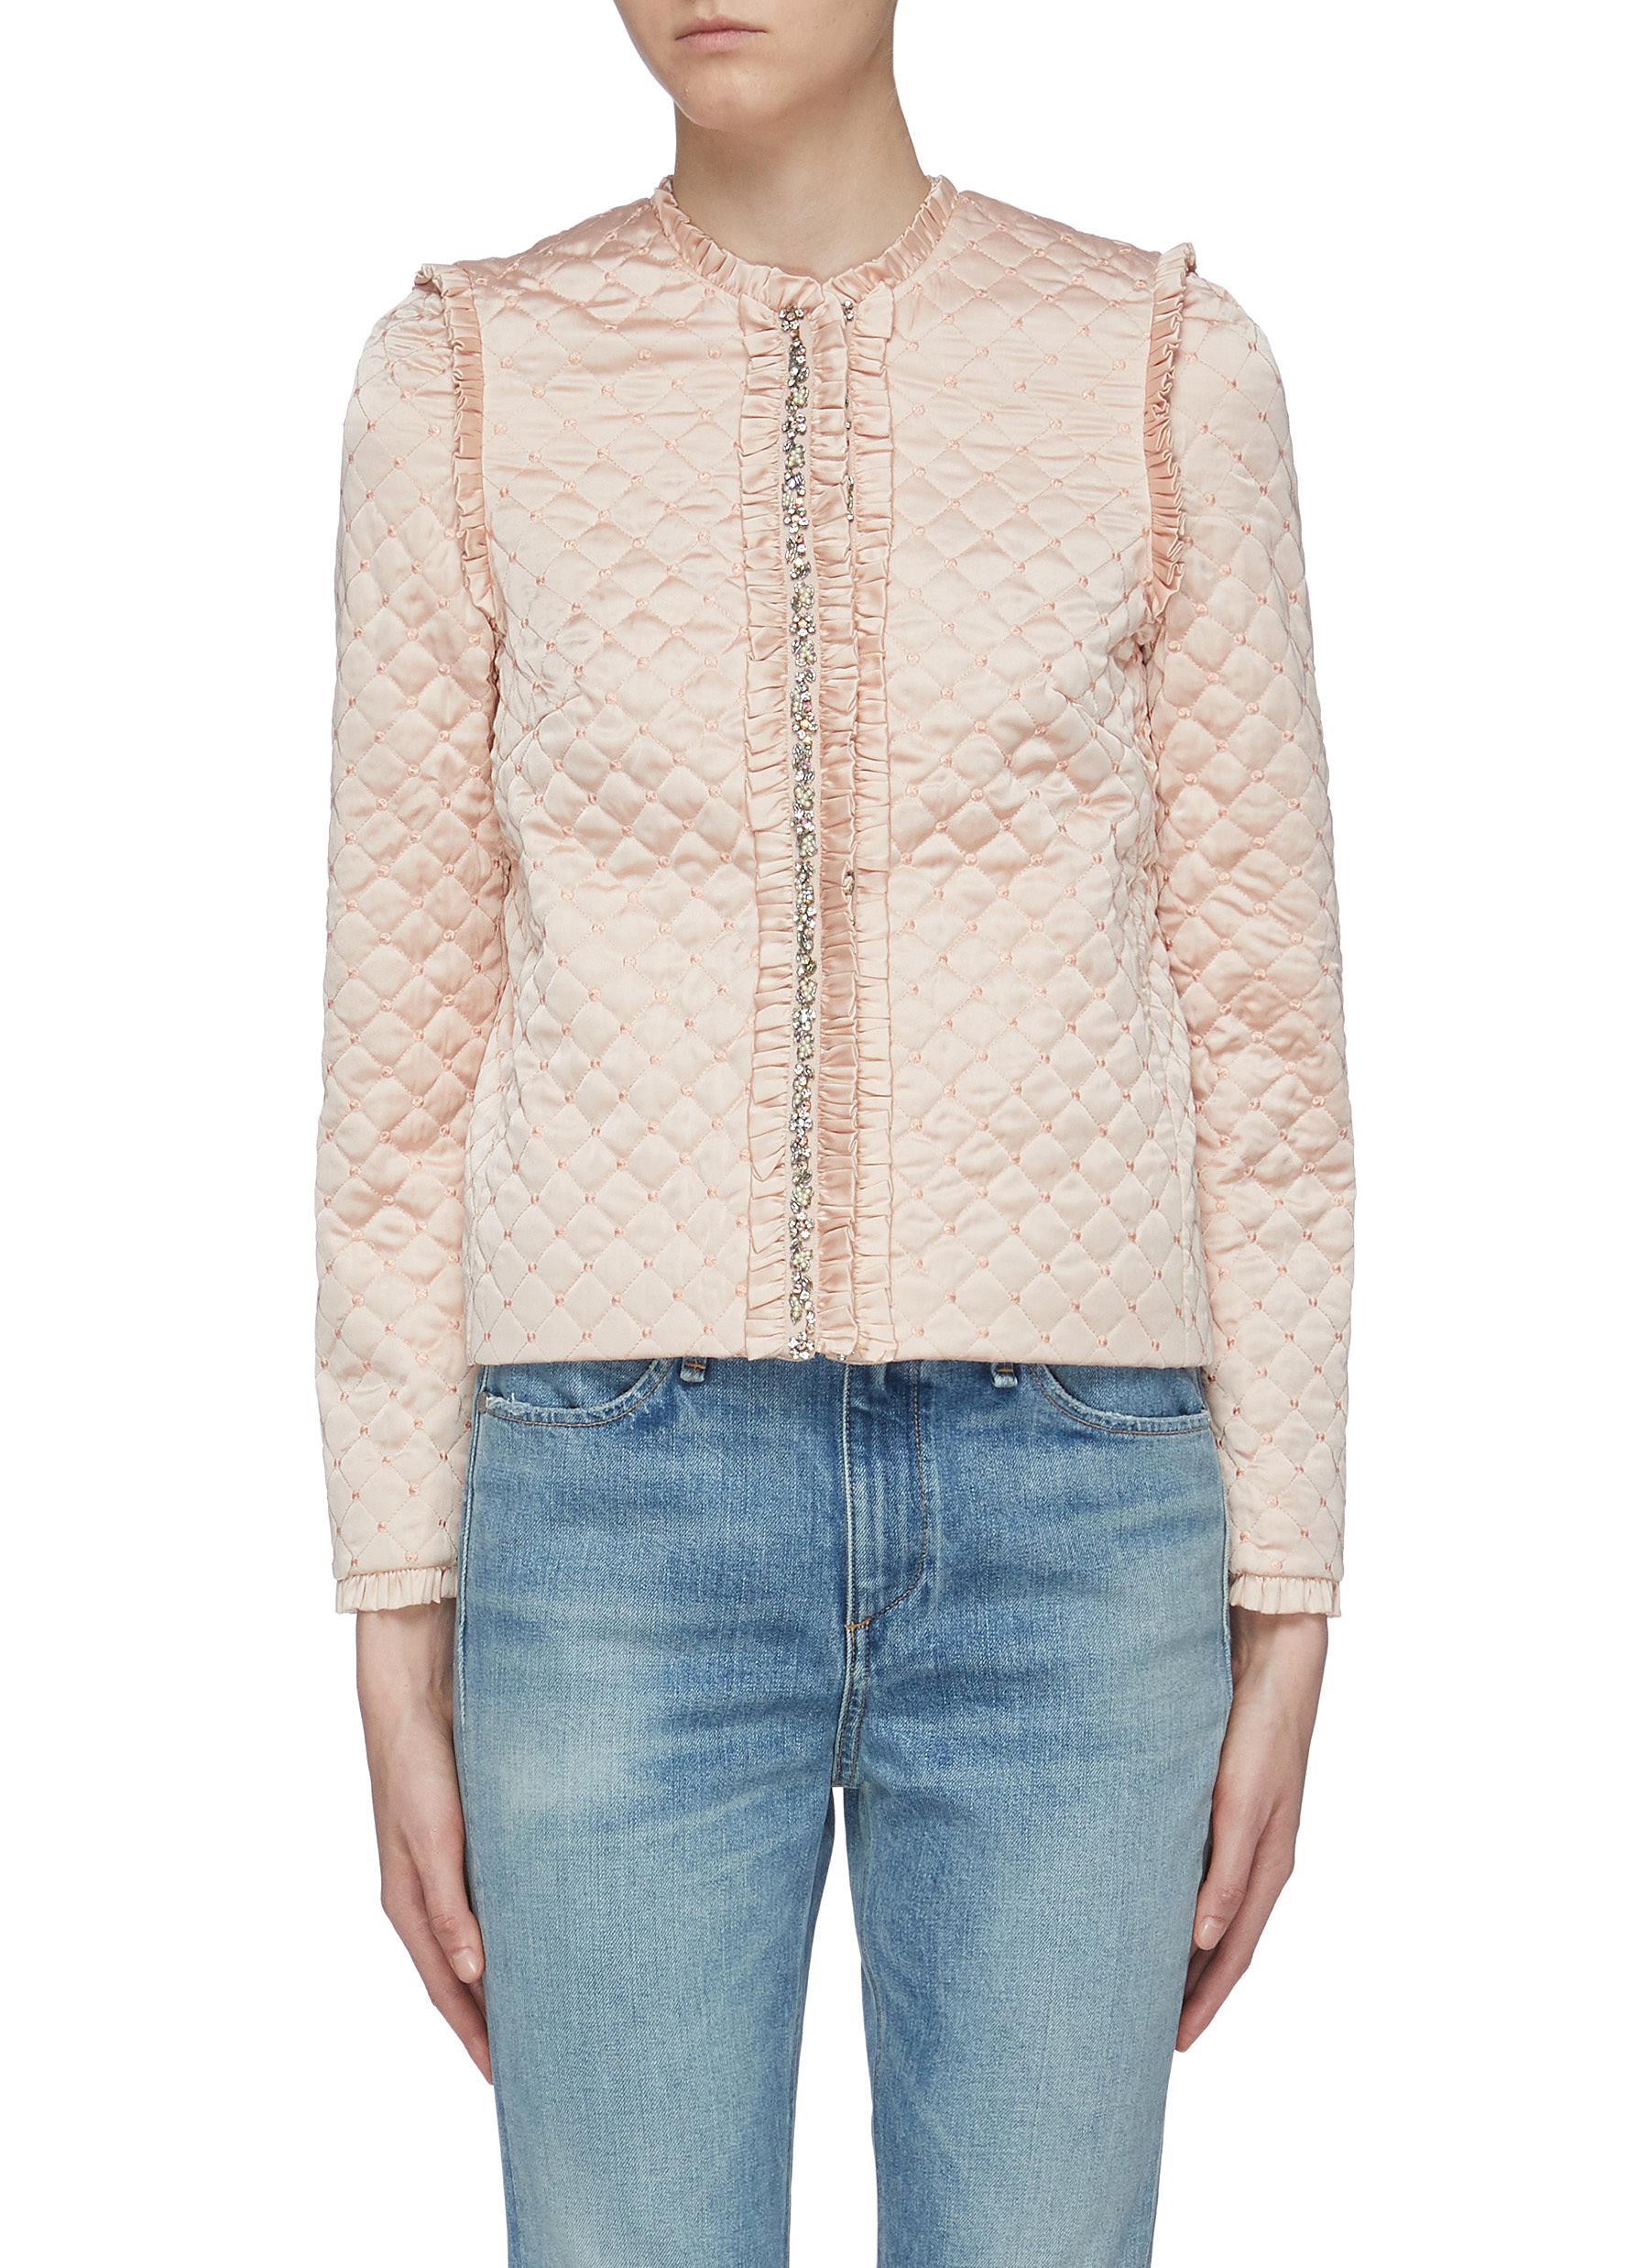 Ruffle trim embellished quilted satin jacket by Needle & Thread